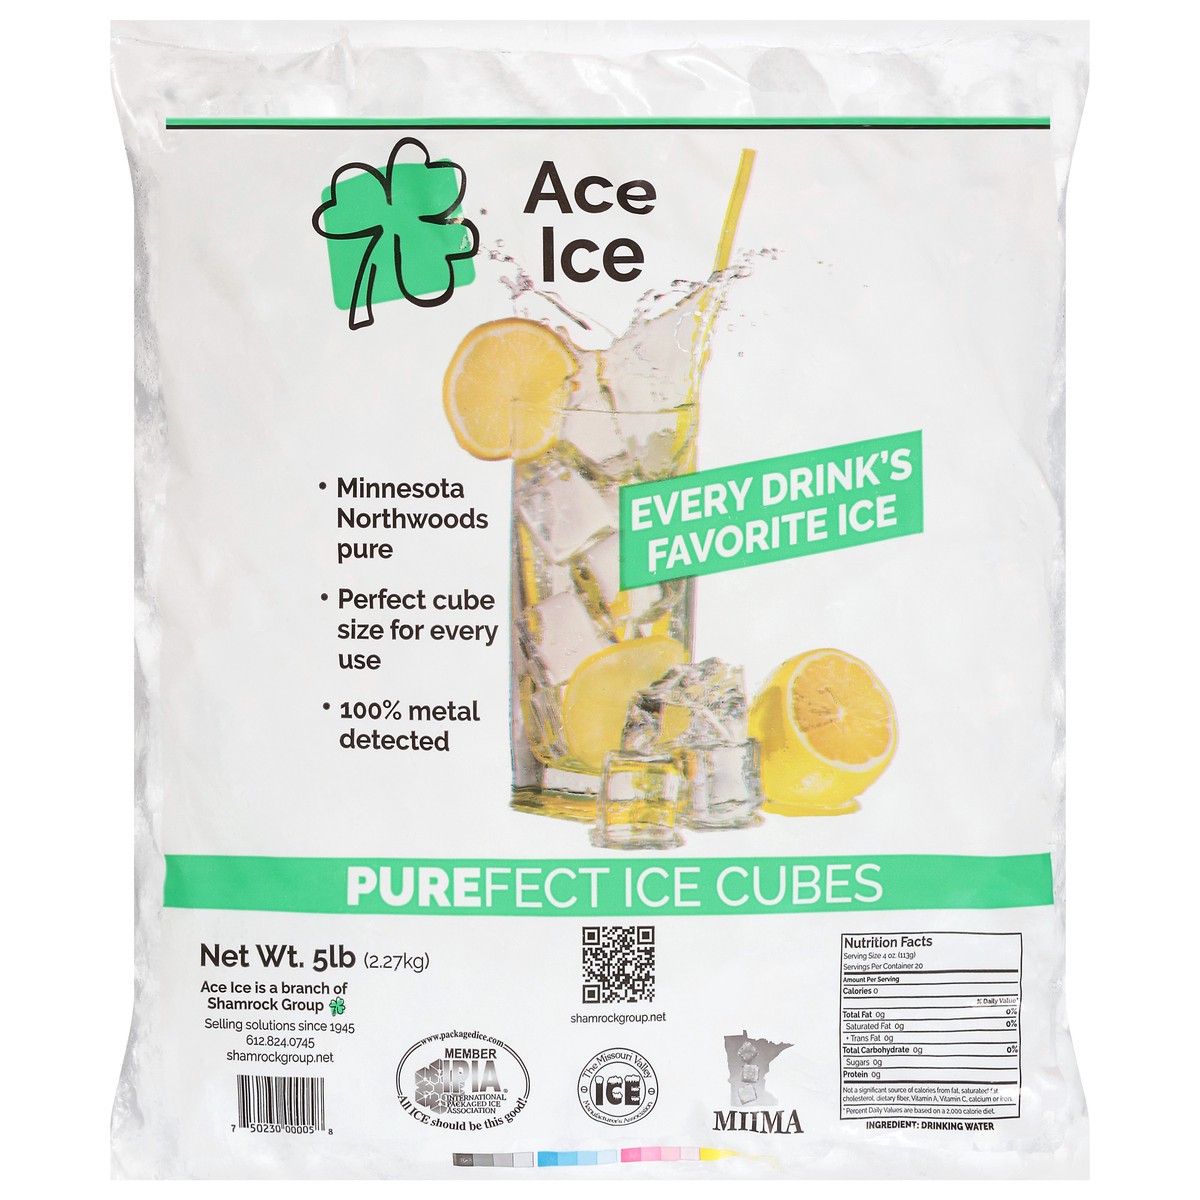 slide 1 of 14, Ace Ice Purefect Ice Cubes 5 lb, 5 lb